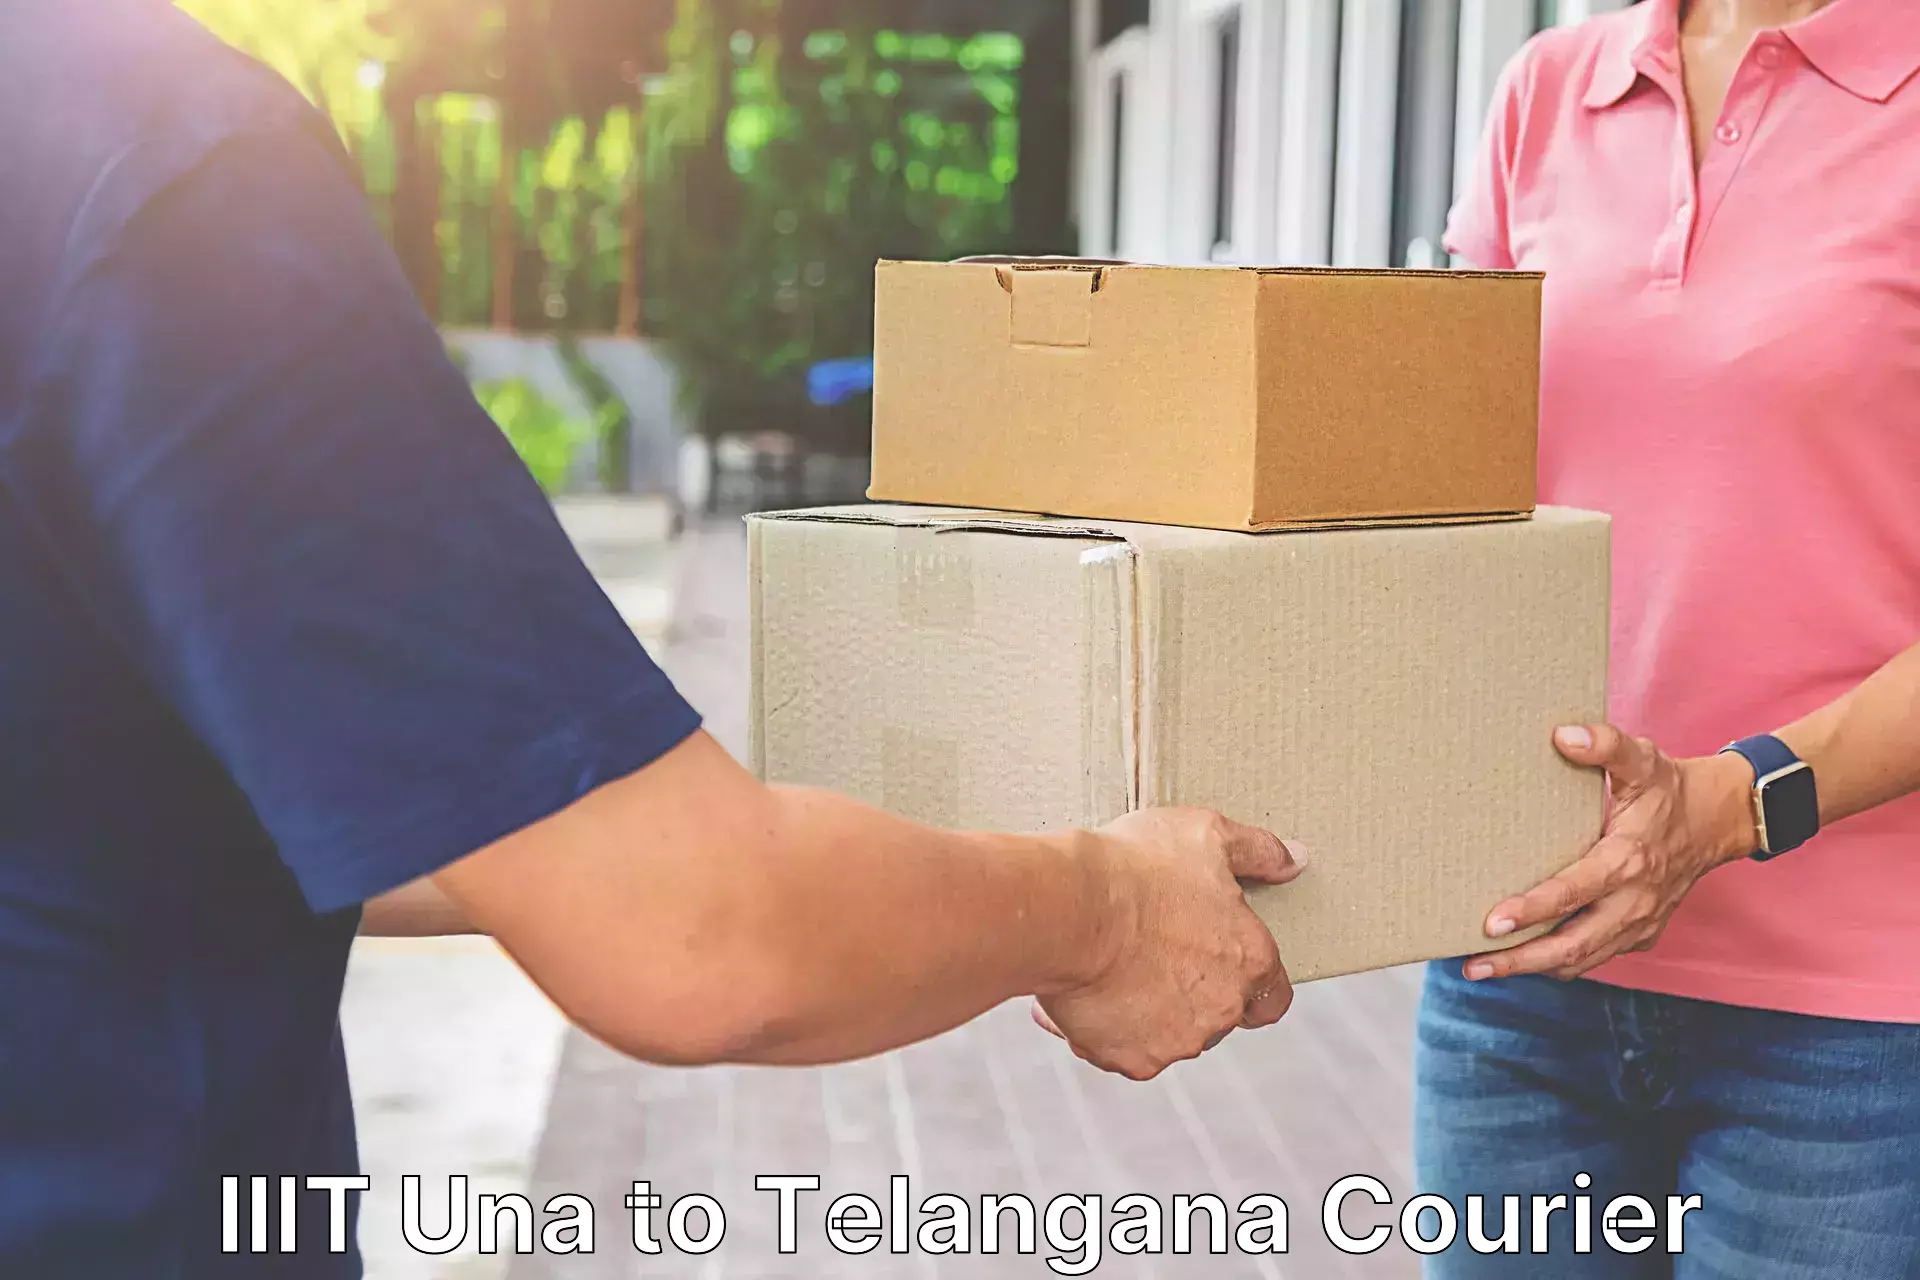 Integrated courier services IIIT Una to Bejjanki